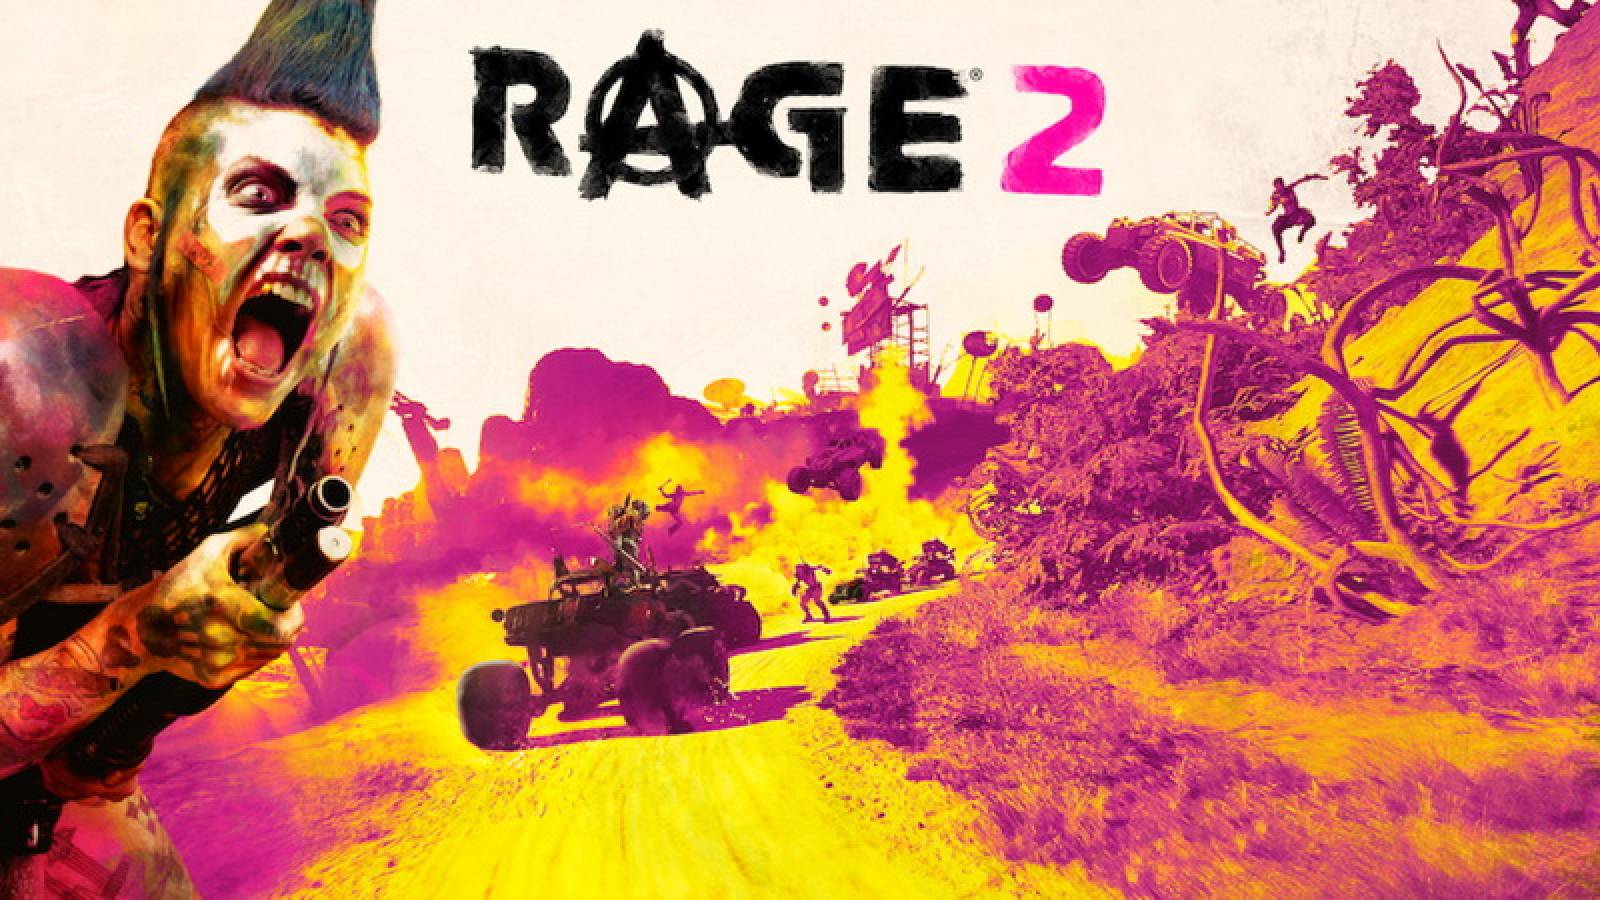 Review Rage 2: Short story but shooting very best